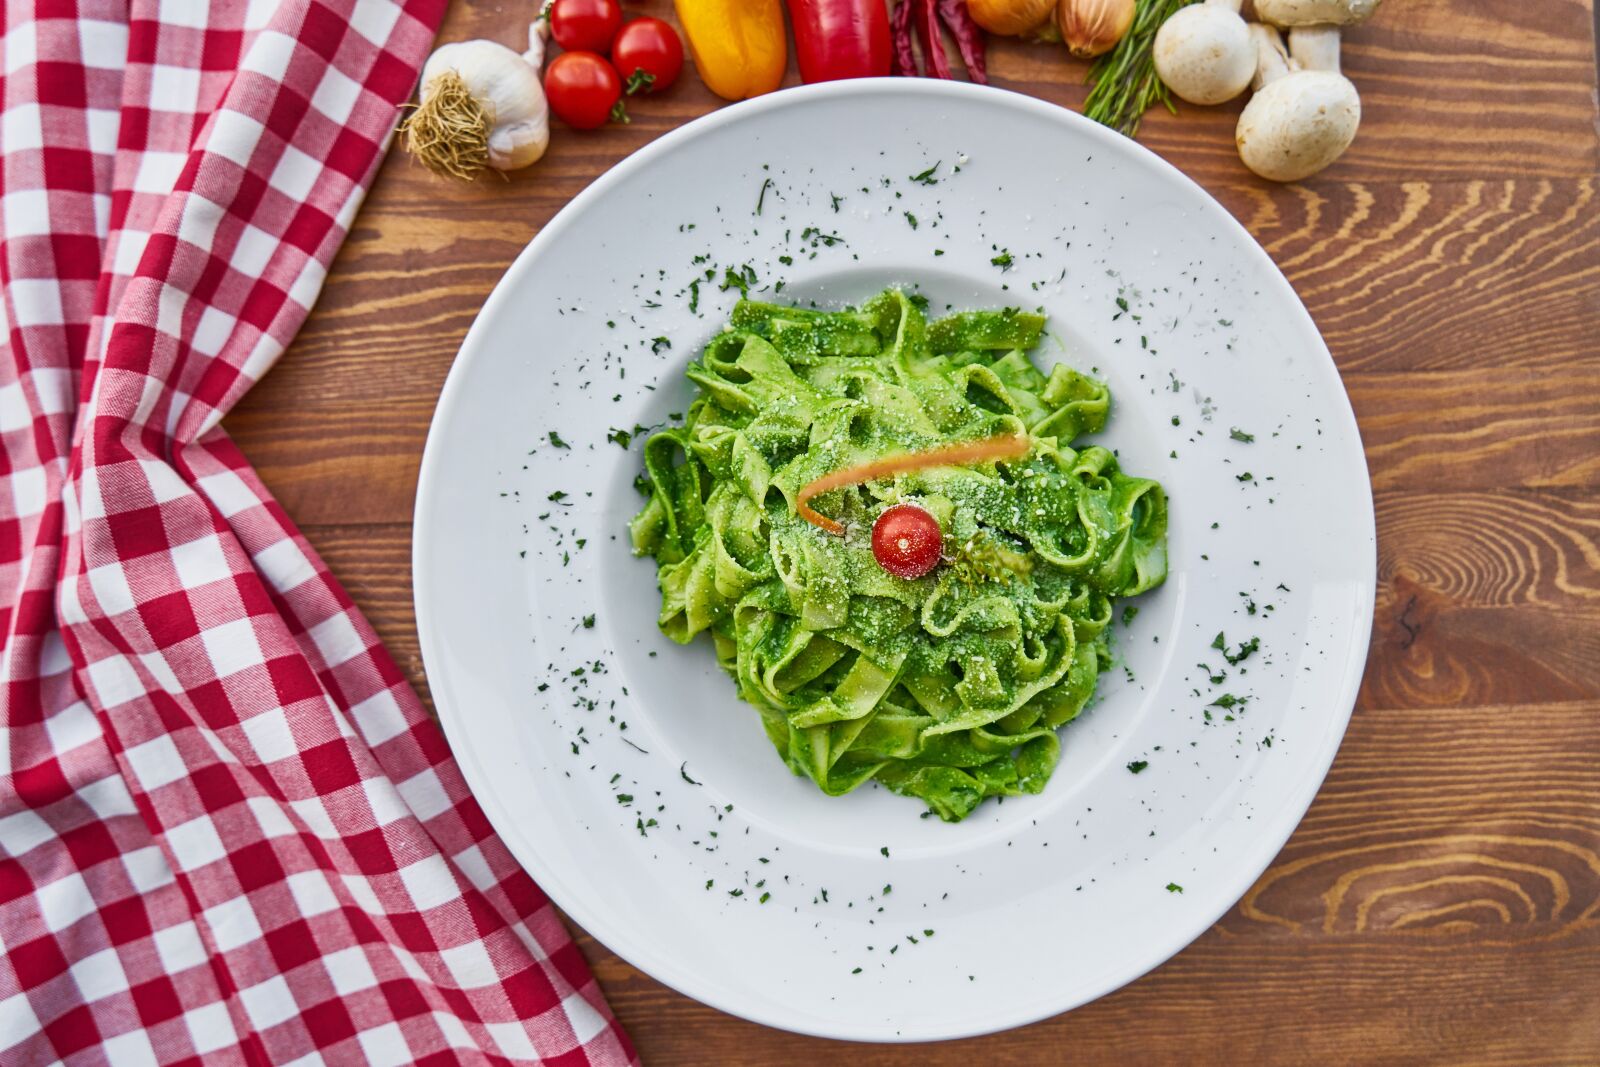 Sony a7R II sample photo. Vegetables, pasta, plate photography